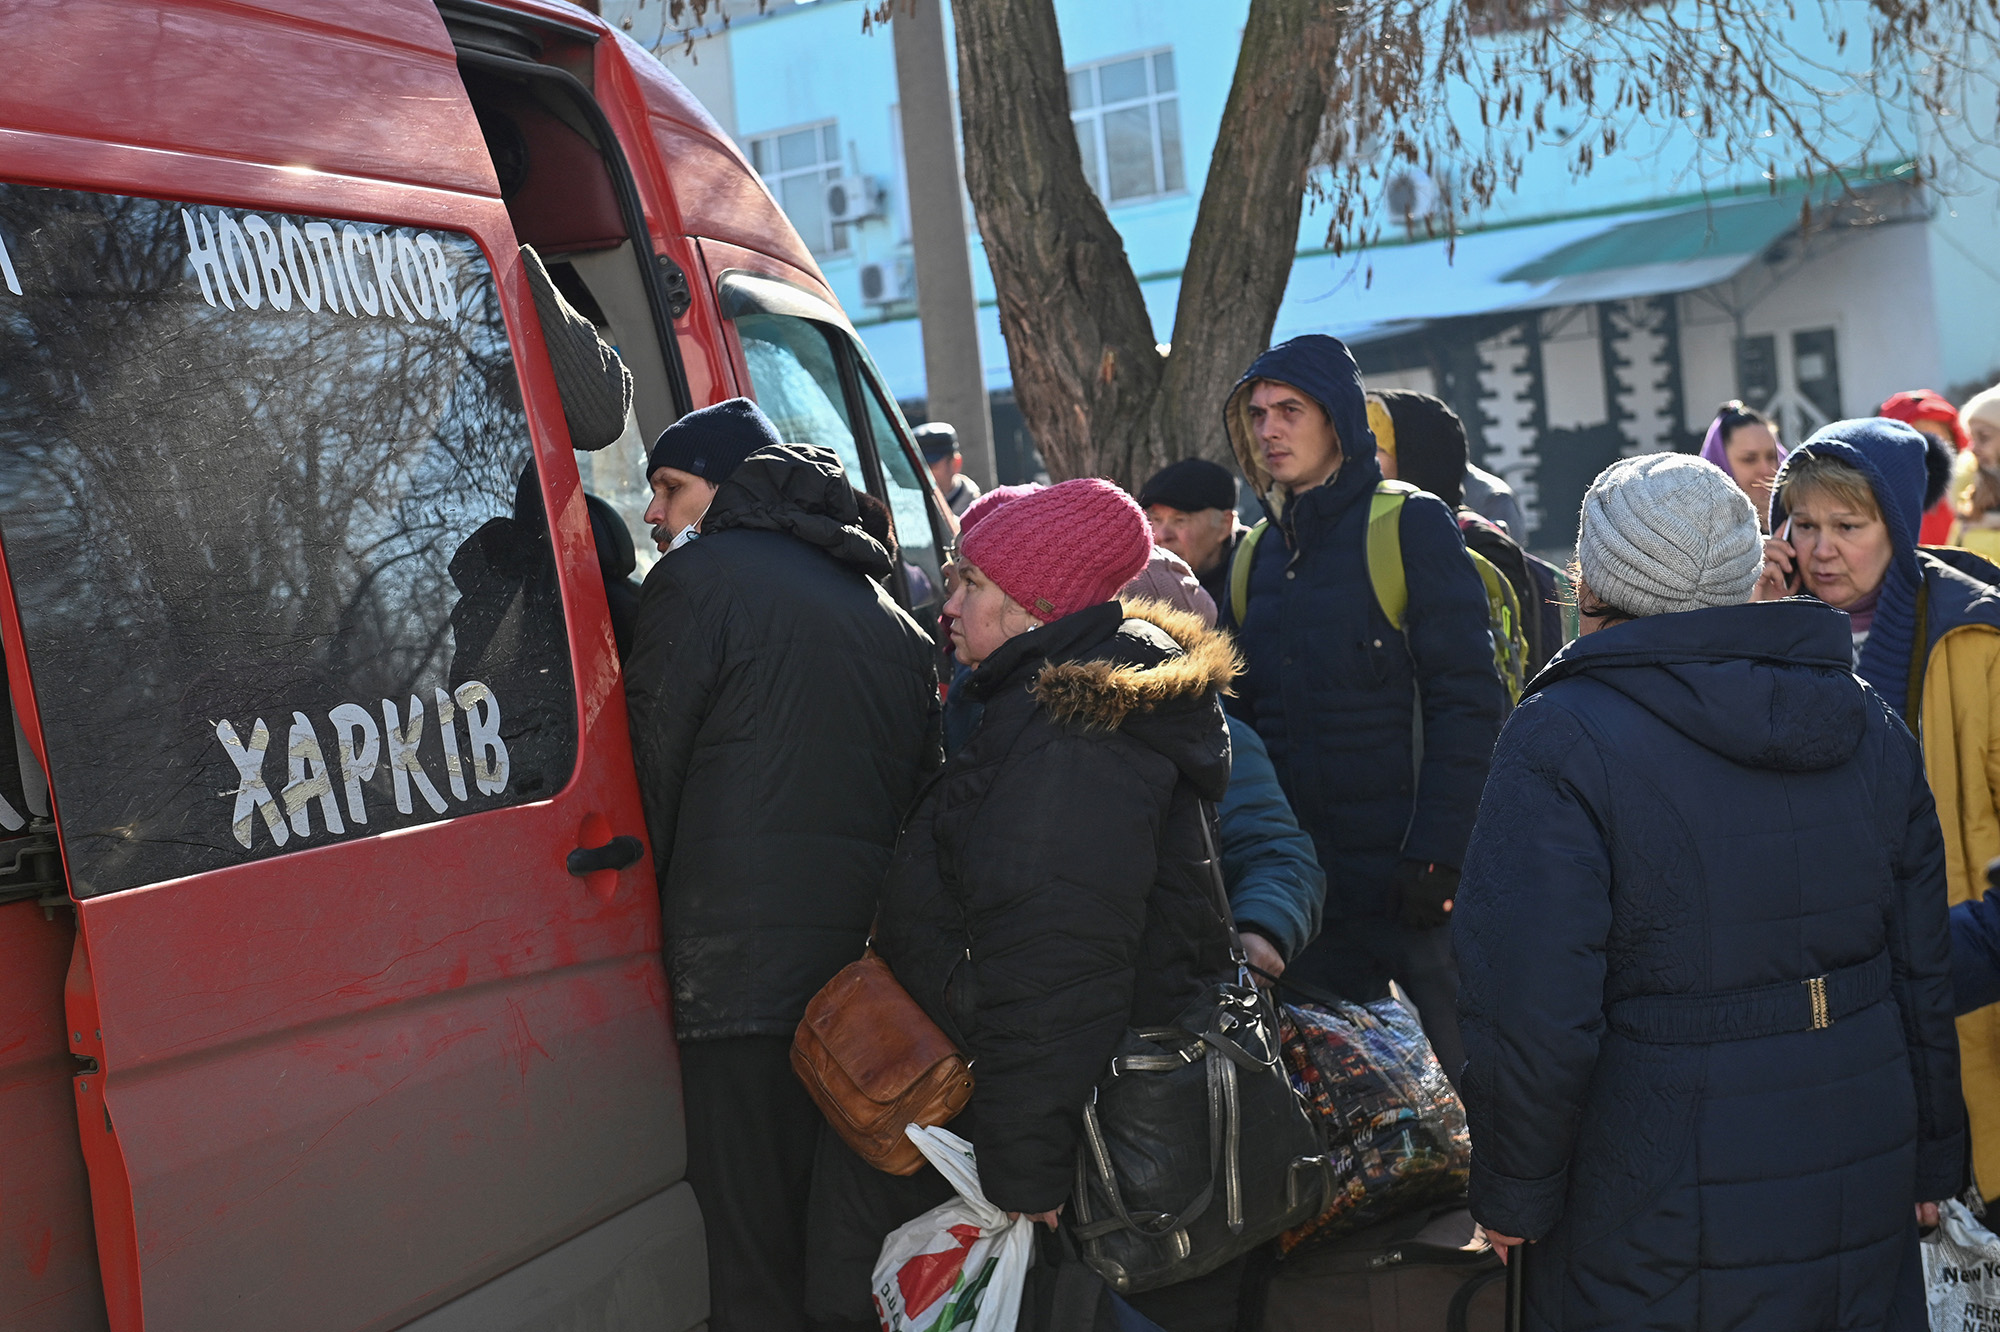 People stand in a queue to board a bus in Sievierodonetsk in the Luhansk region of Ukraine on March 21.